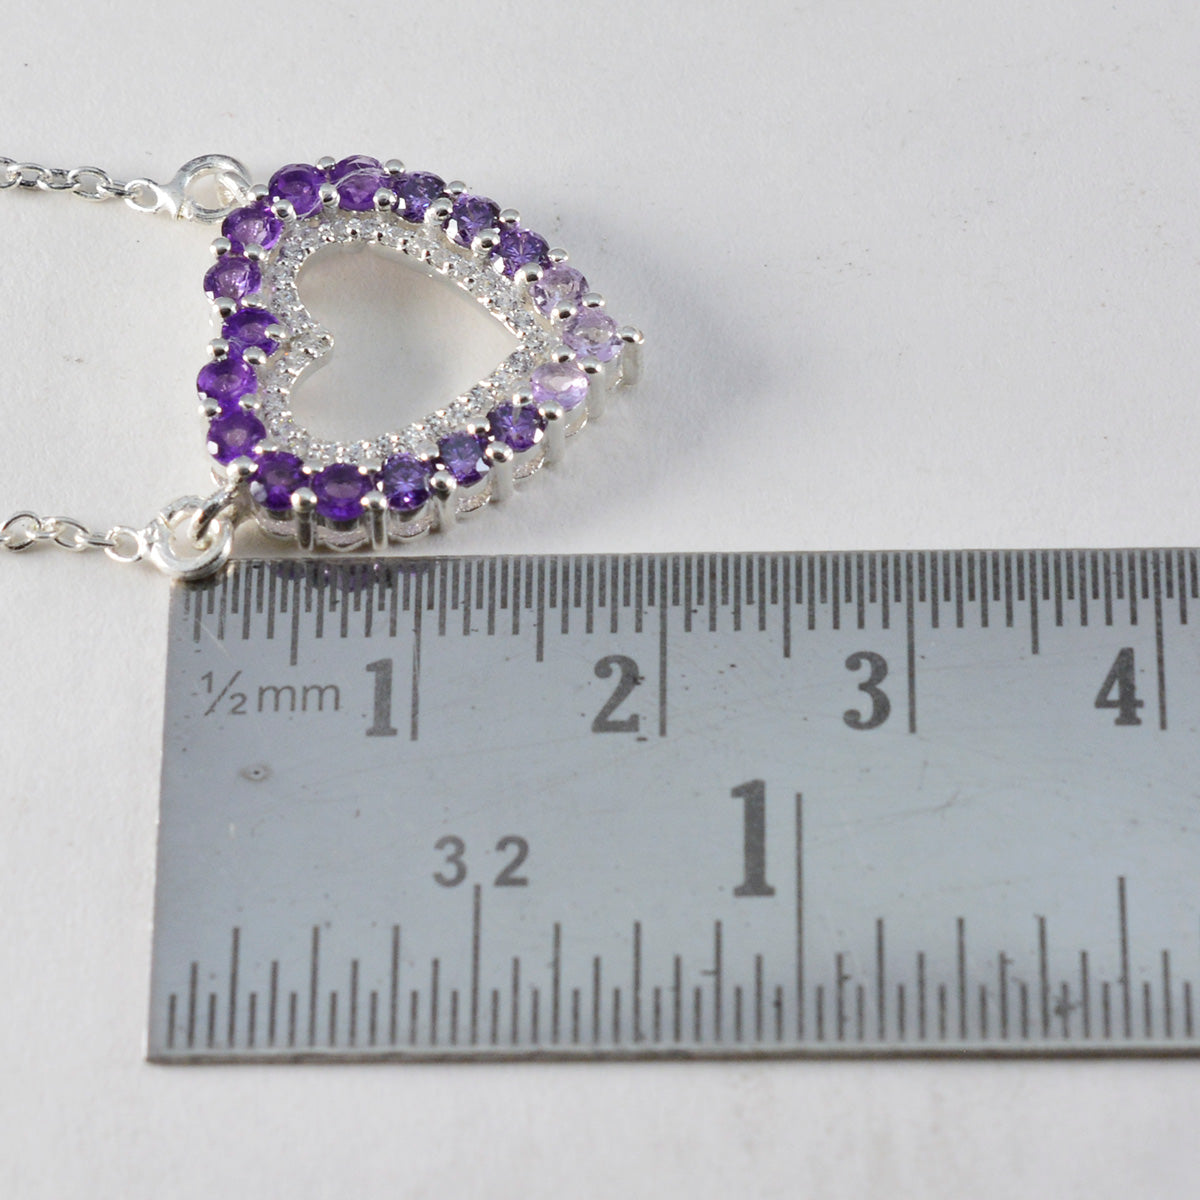 Riyo Beauteous Gems Round Faceted Purple Amethyst Silver Pendant Gift For Sister